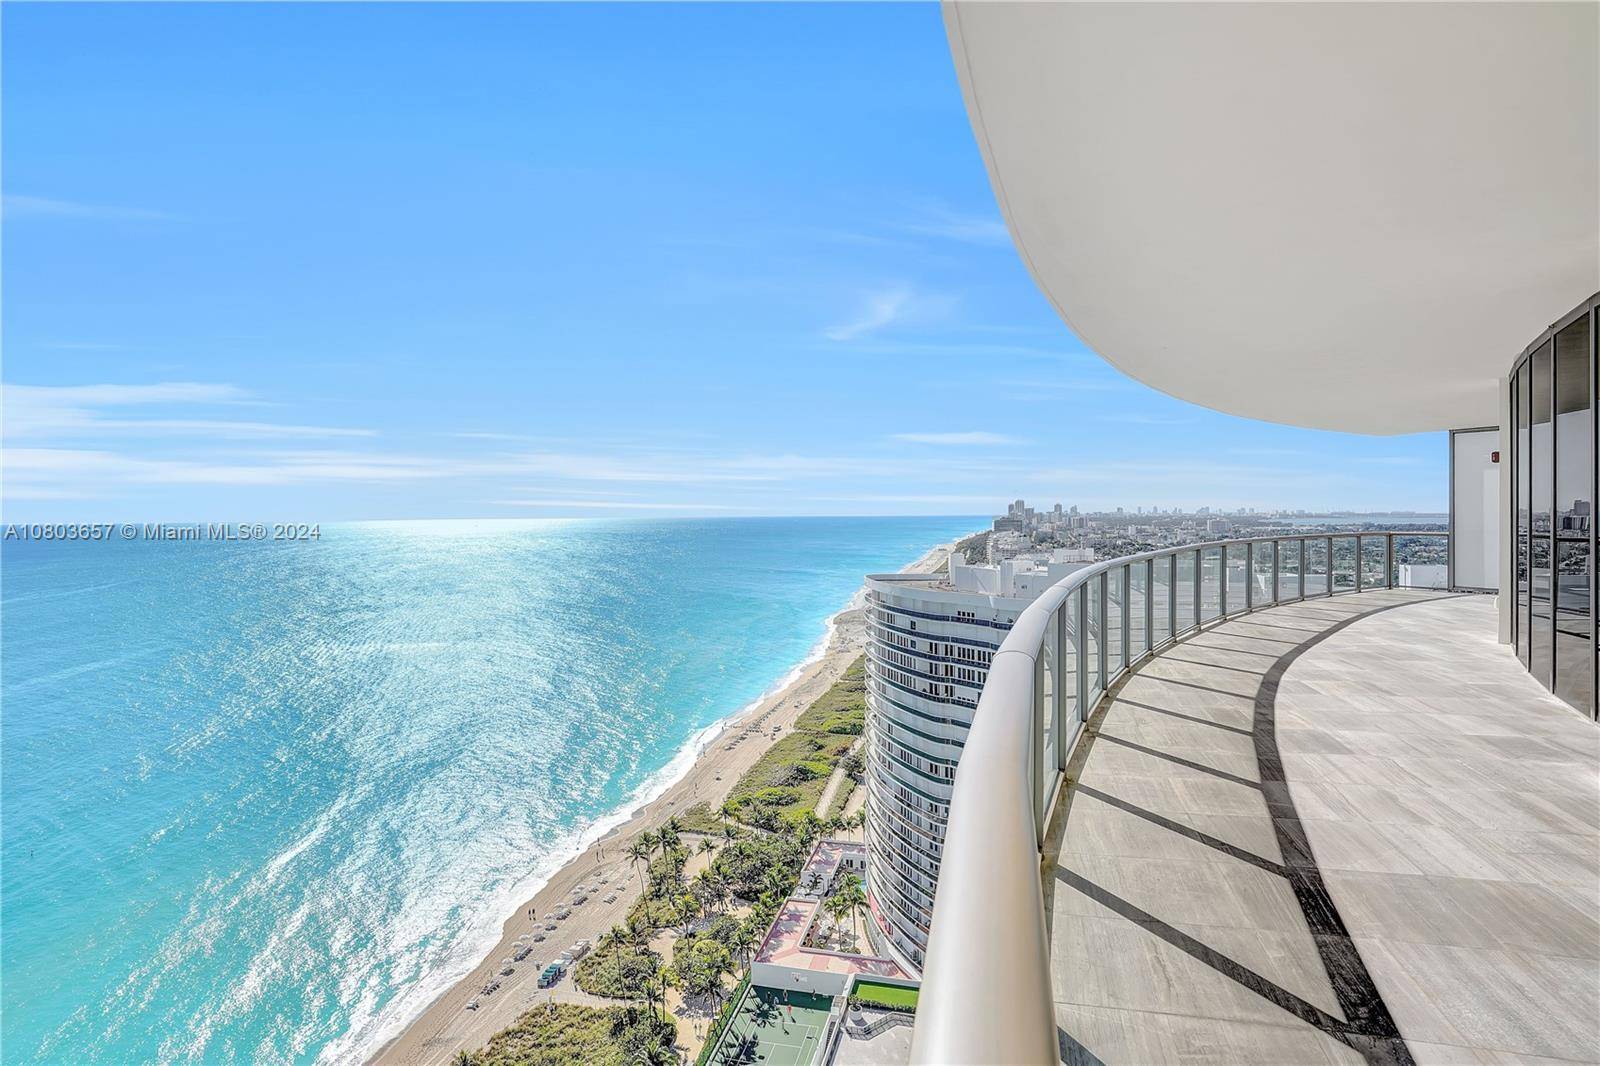 ST. REGIS BAL HARBOUR, THE ULTIMATE OF LUXURY ENJOY LIVING IN THIS CORNER WRAP AROUND RESIDENCE SURROUNDED BY PANARAMIC OCEAN FRONT VIEWS MAJESTIC SOUTH VIEWS TO ENDLESS NORTH EASE COASTLINE.